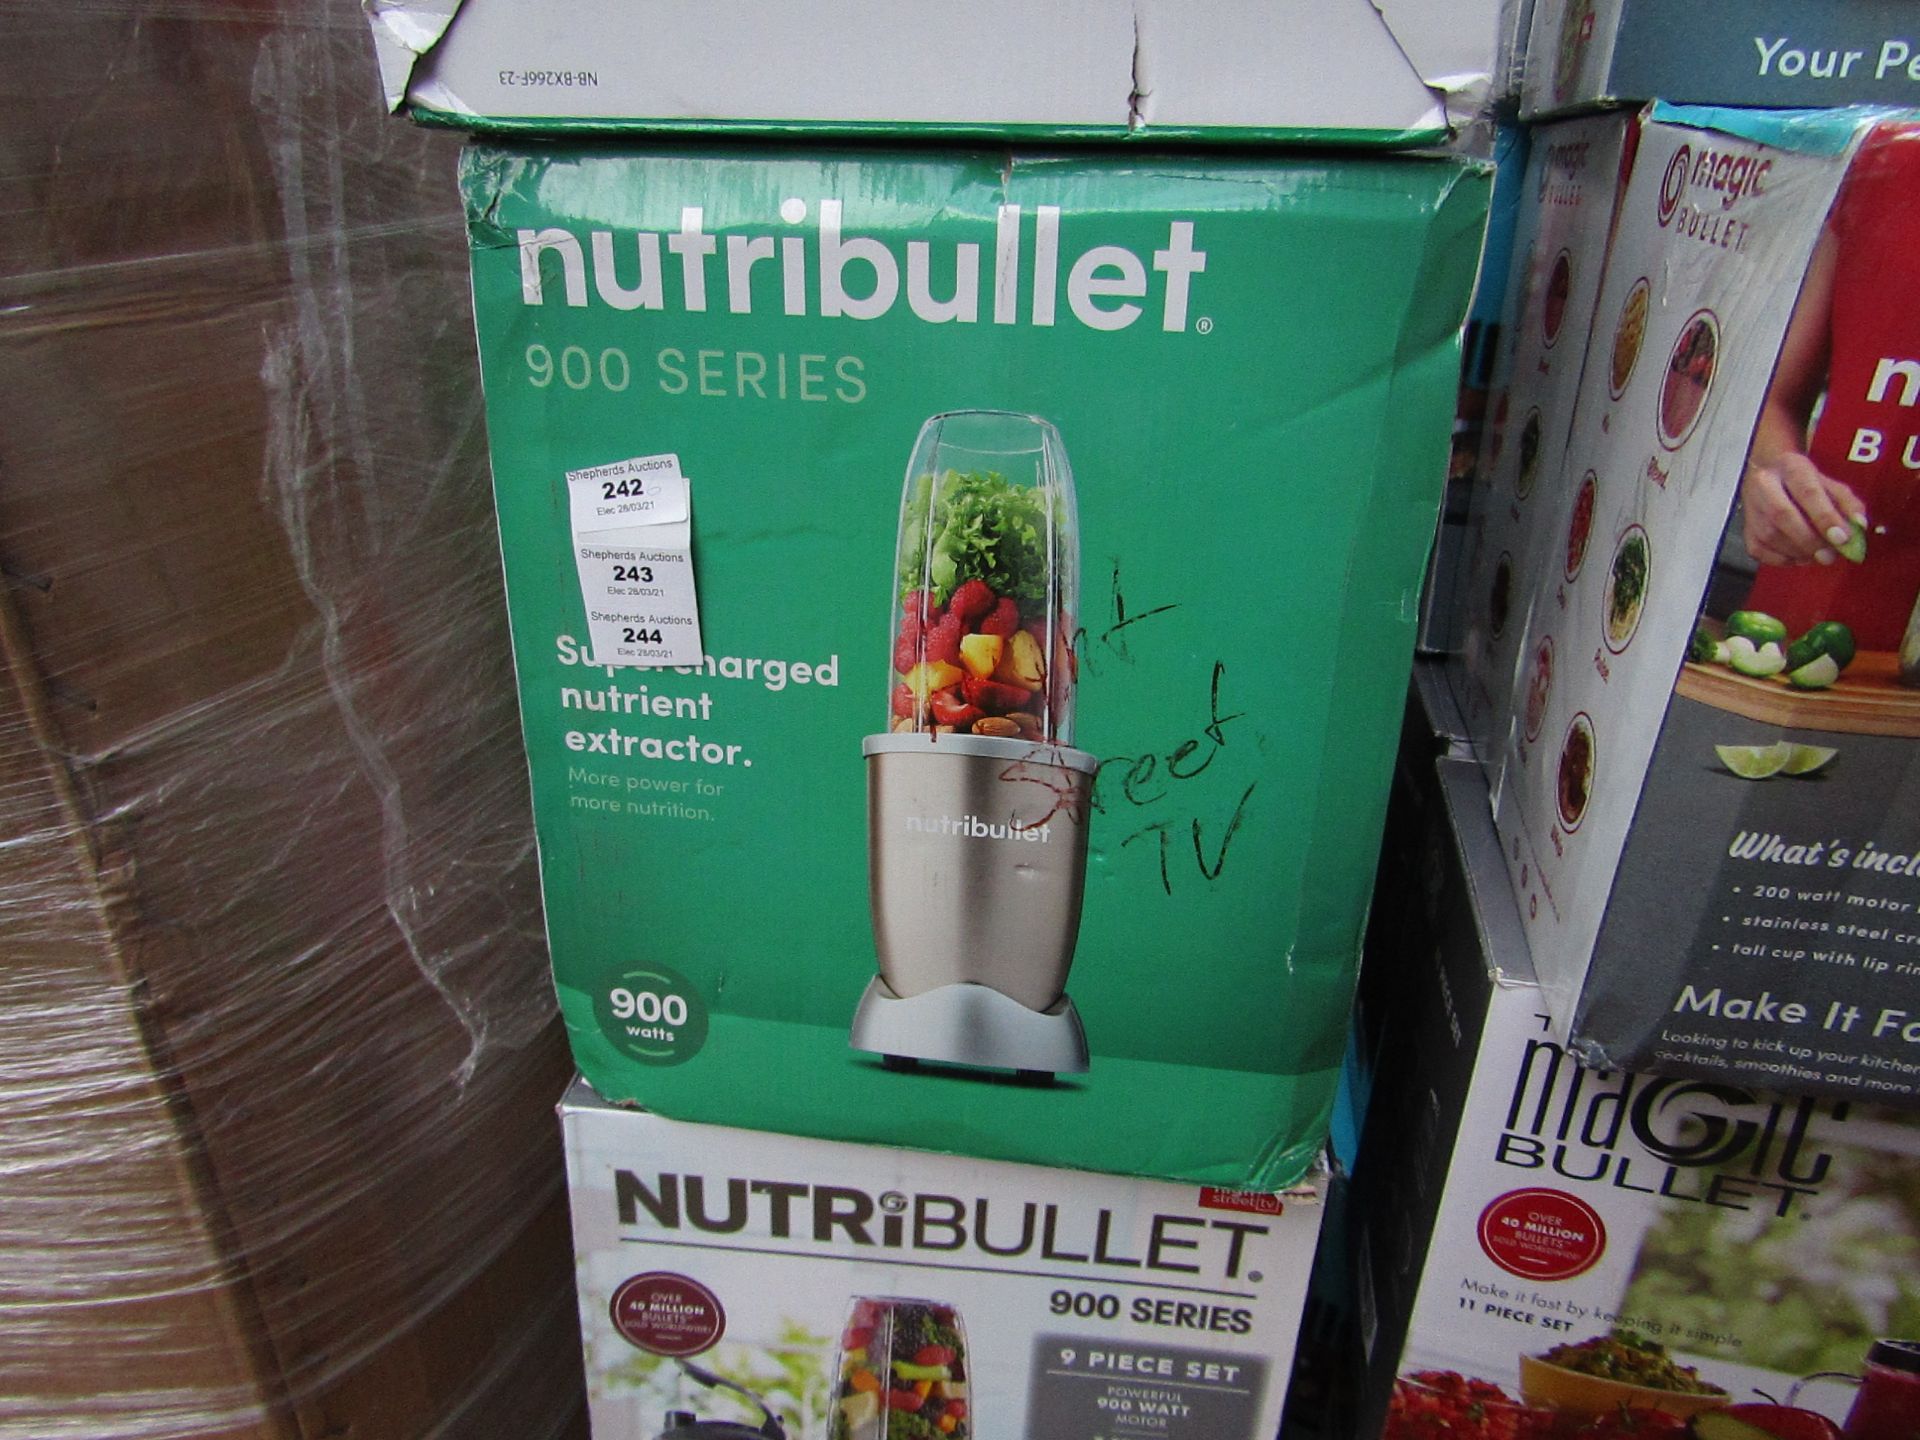 | 6X | NUTRI BULLET 900 SERIES | UNCHECKED AND BOXED | NO ONLINE RE-SALE | SKU C5060191467353 |